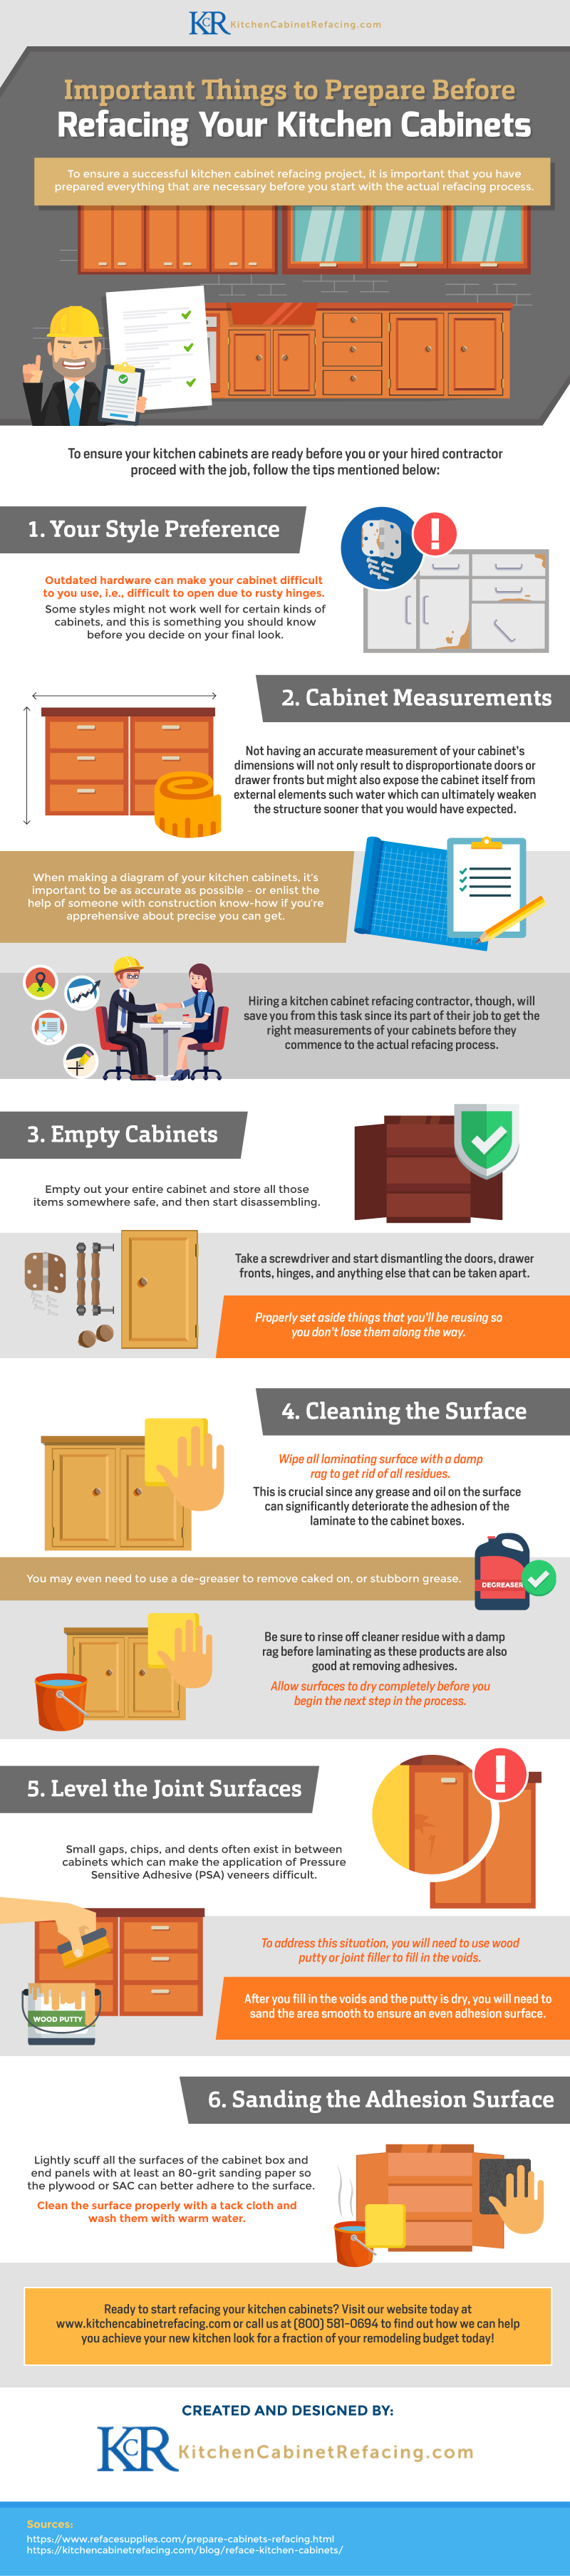 Important Things to Prepare Before Refacing Your Kitchen Cabinets